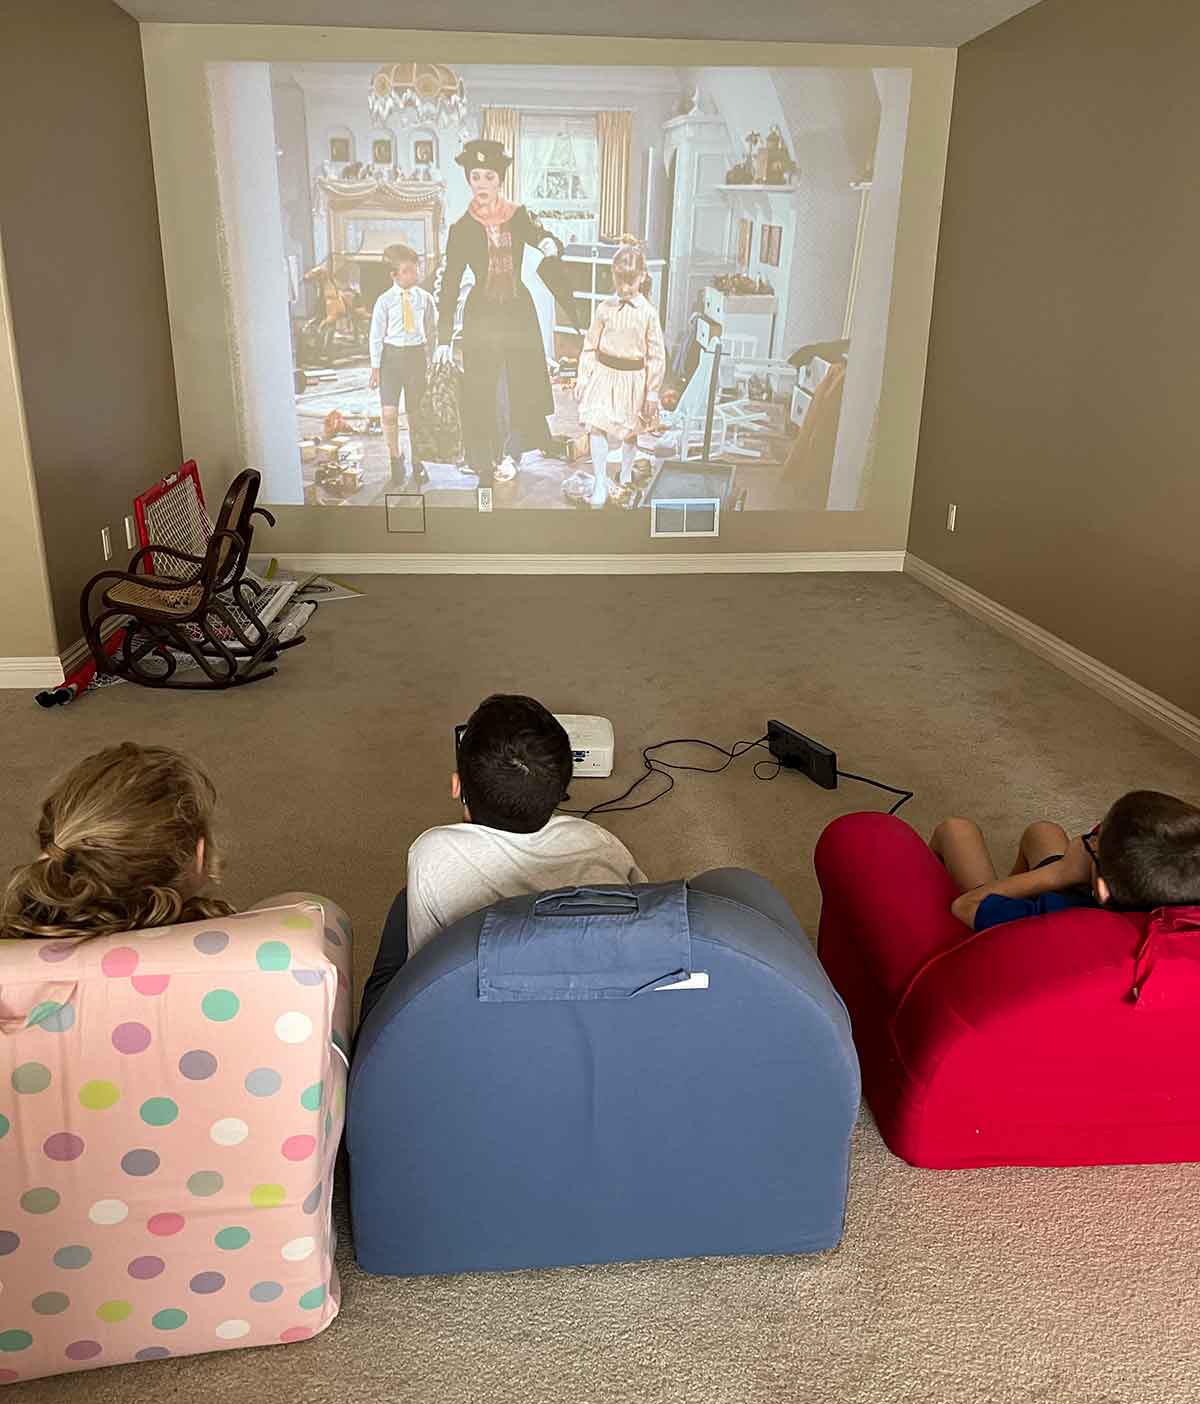 Three kids sitting in small chairs watching Mary Poppins on a projector screen.